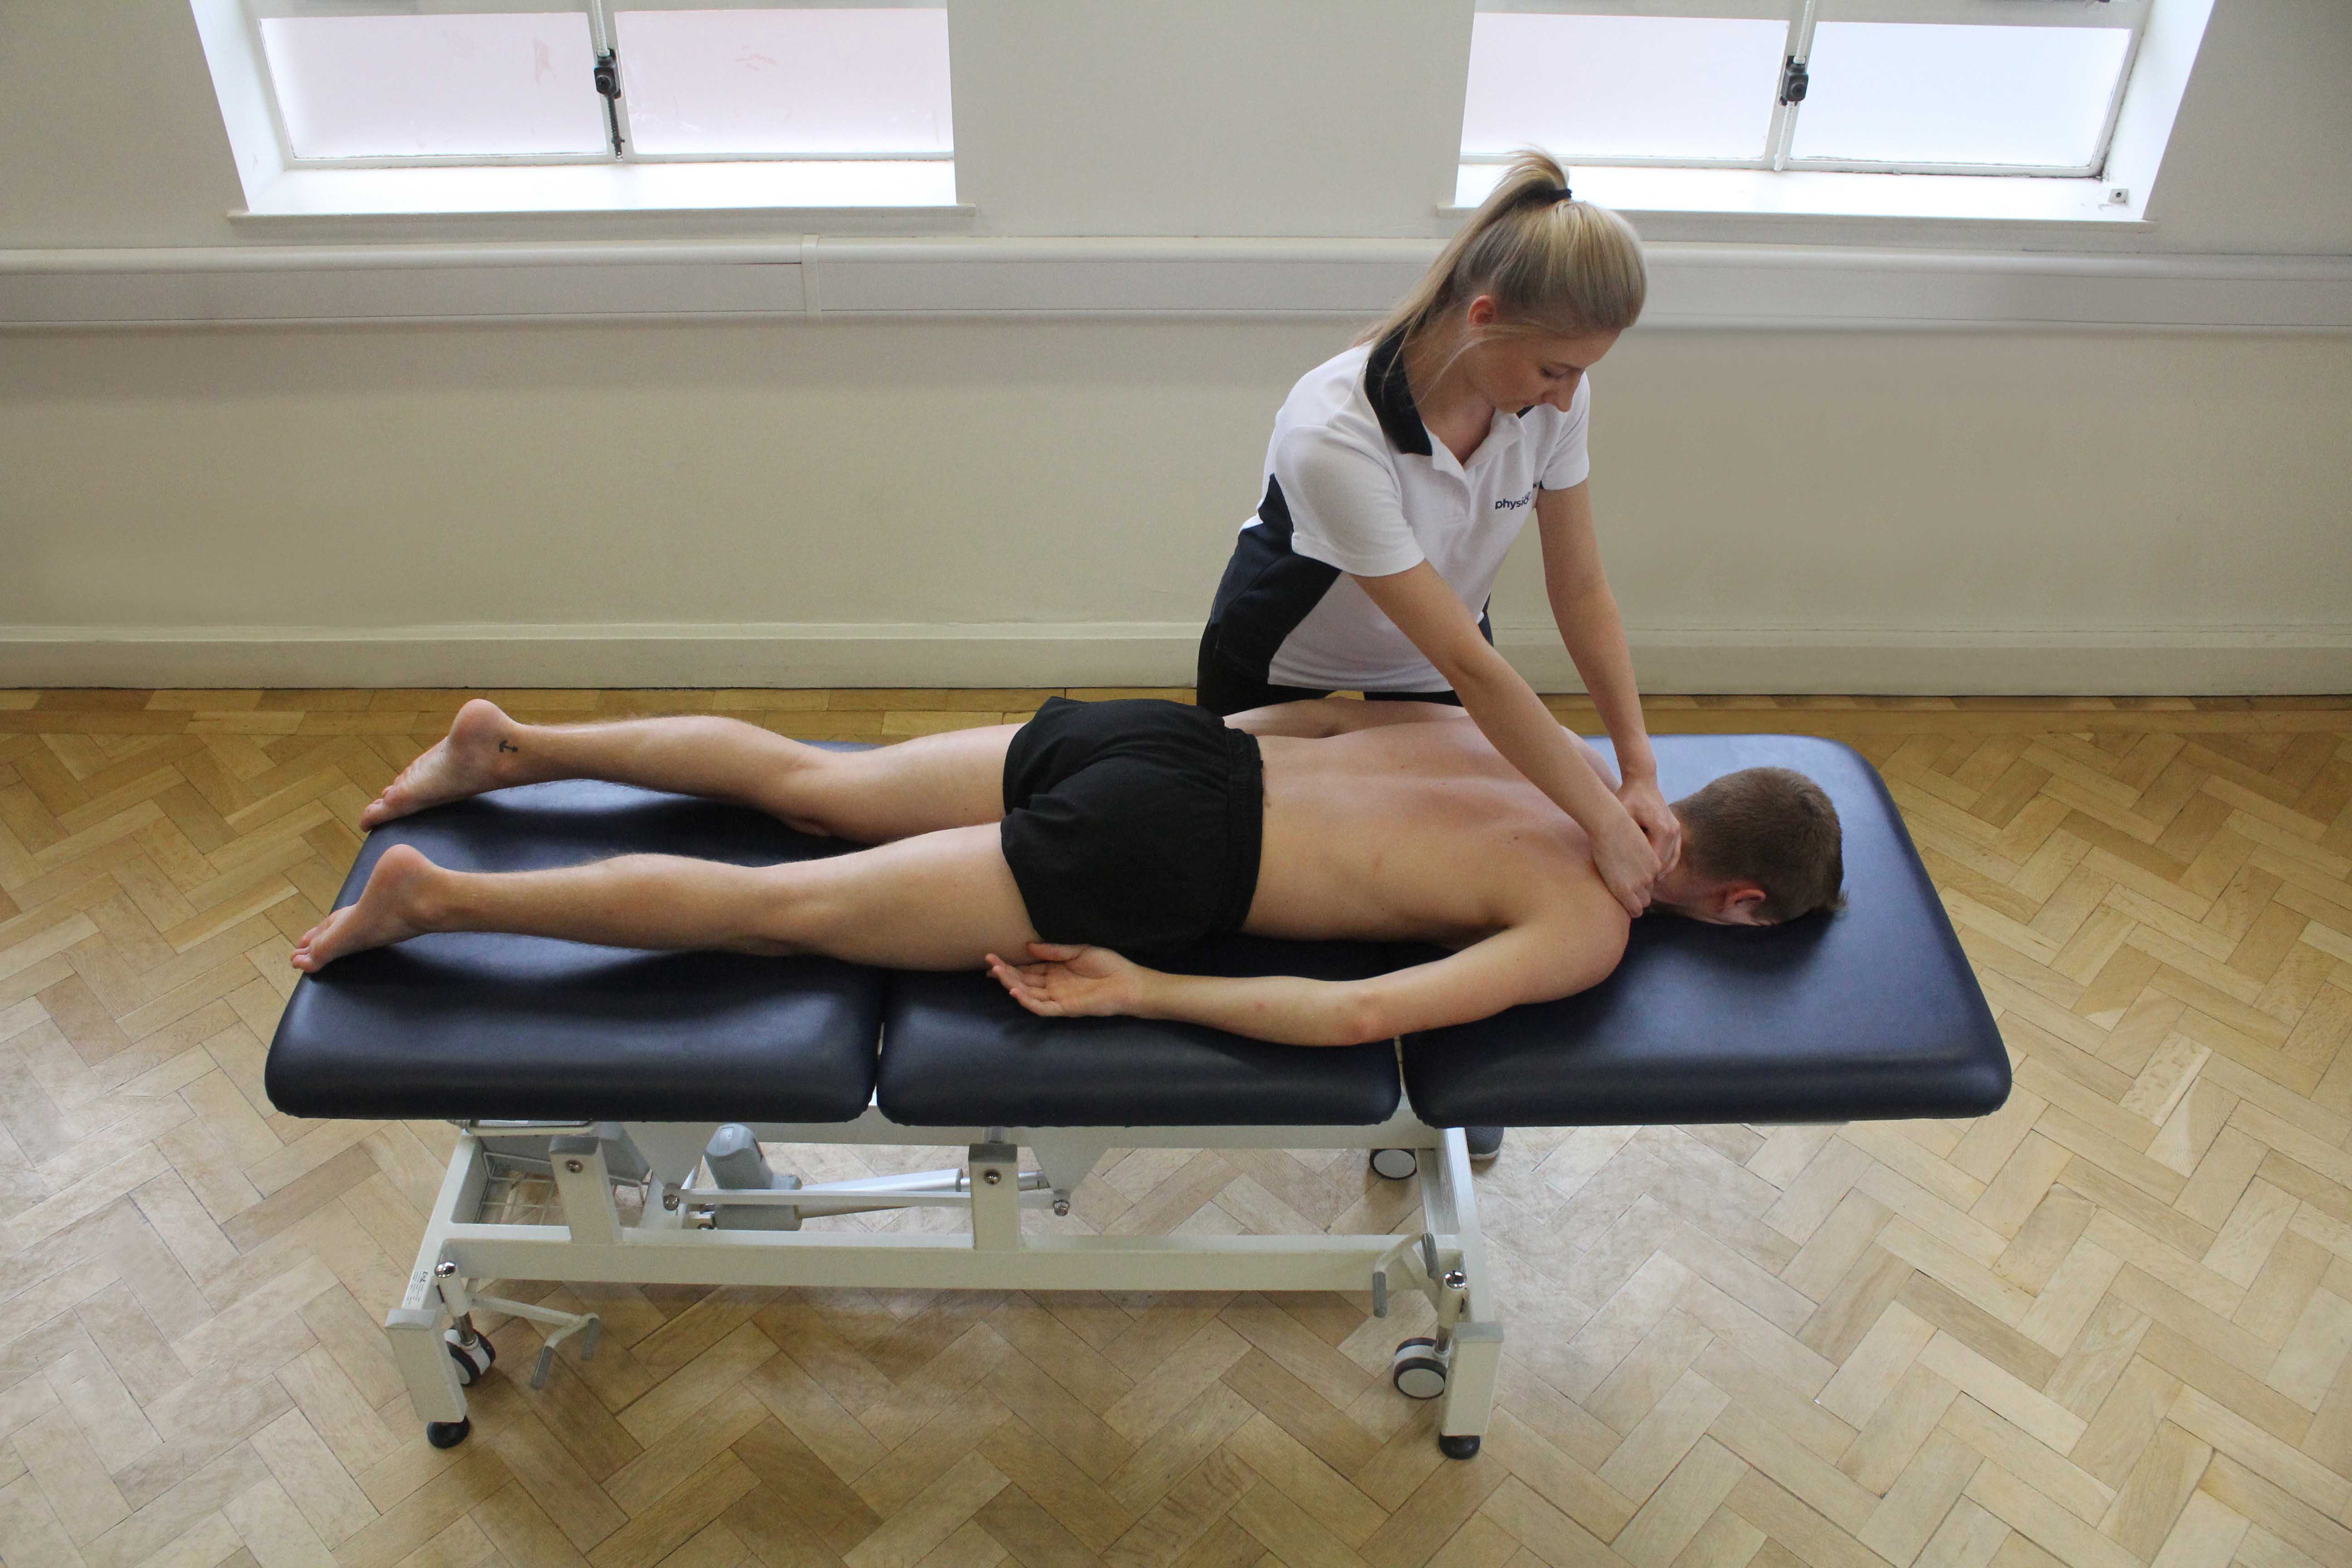 Deep tissue massage of the trapezius muscle by the therapist